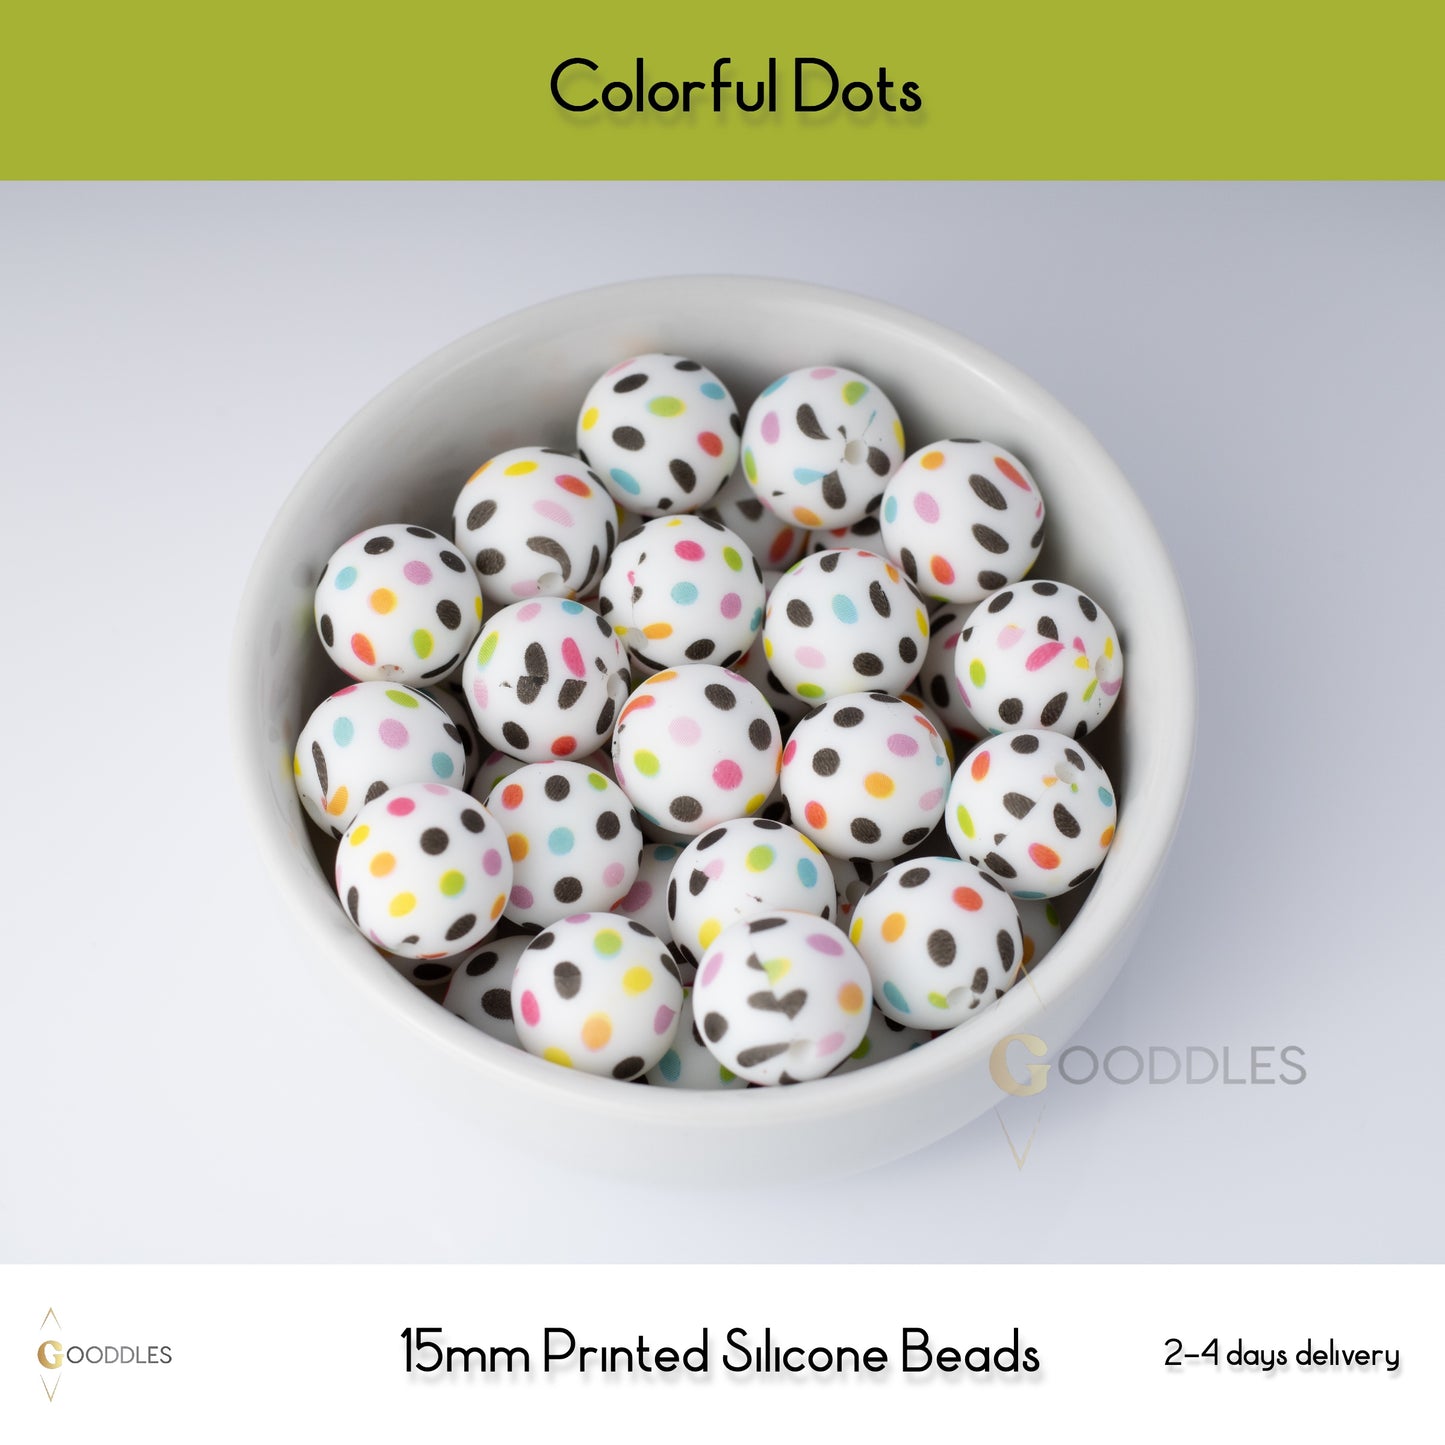 5pcs, Colorful Dots Silicone Beads Printed Round Silicone Beads